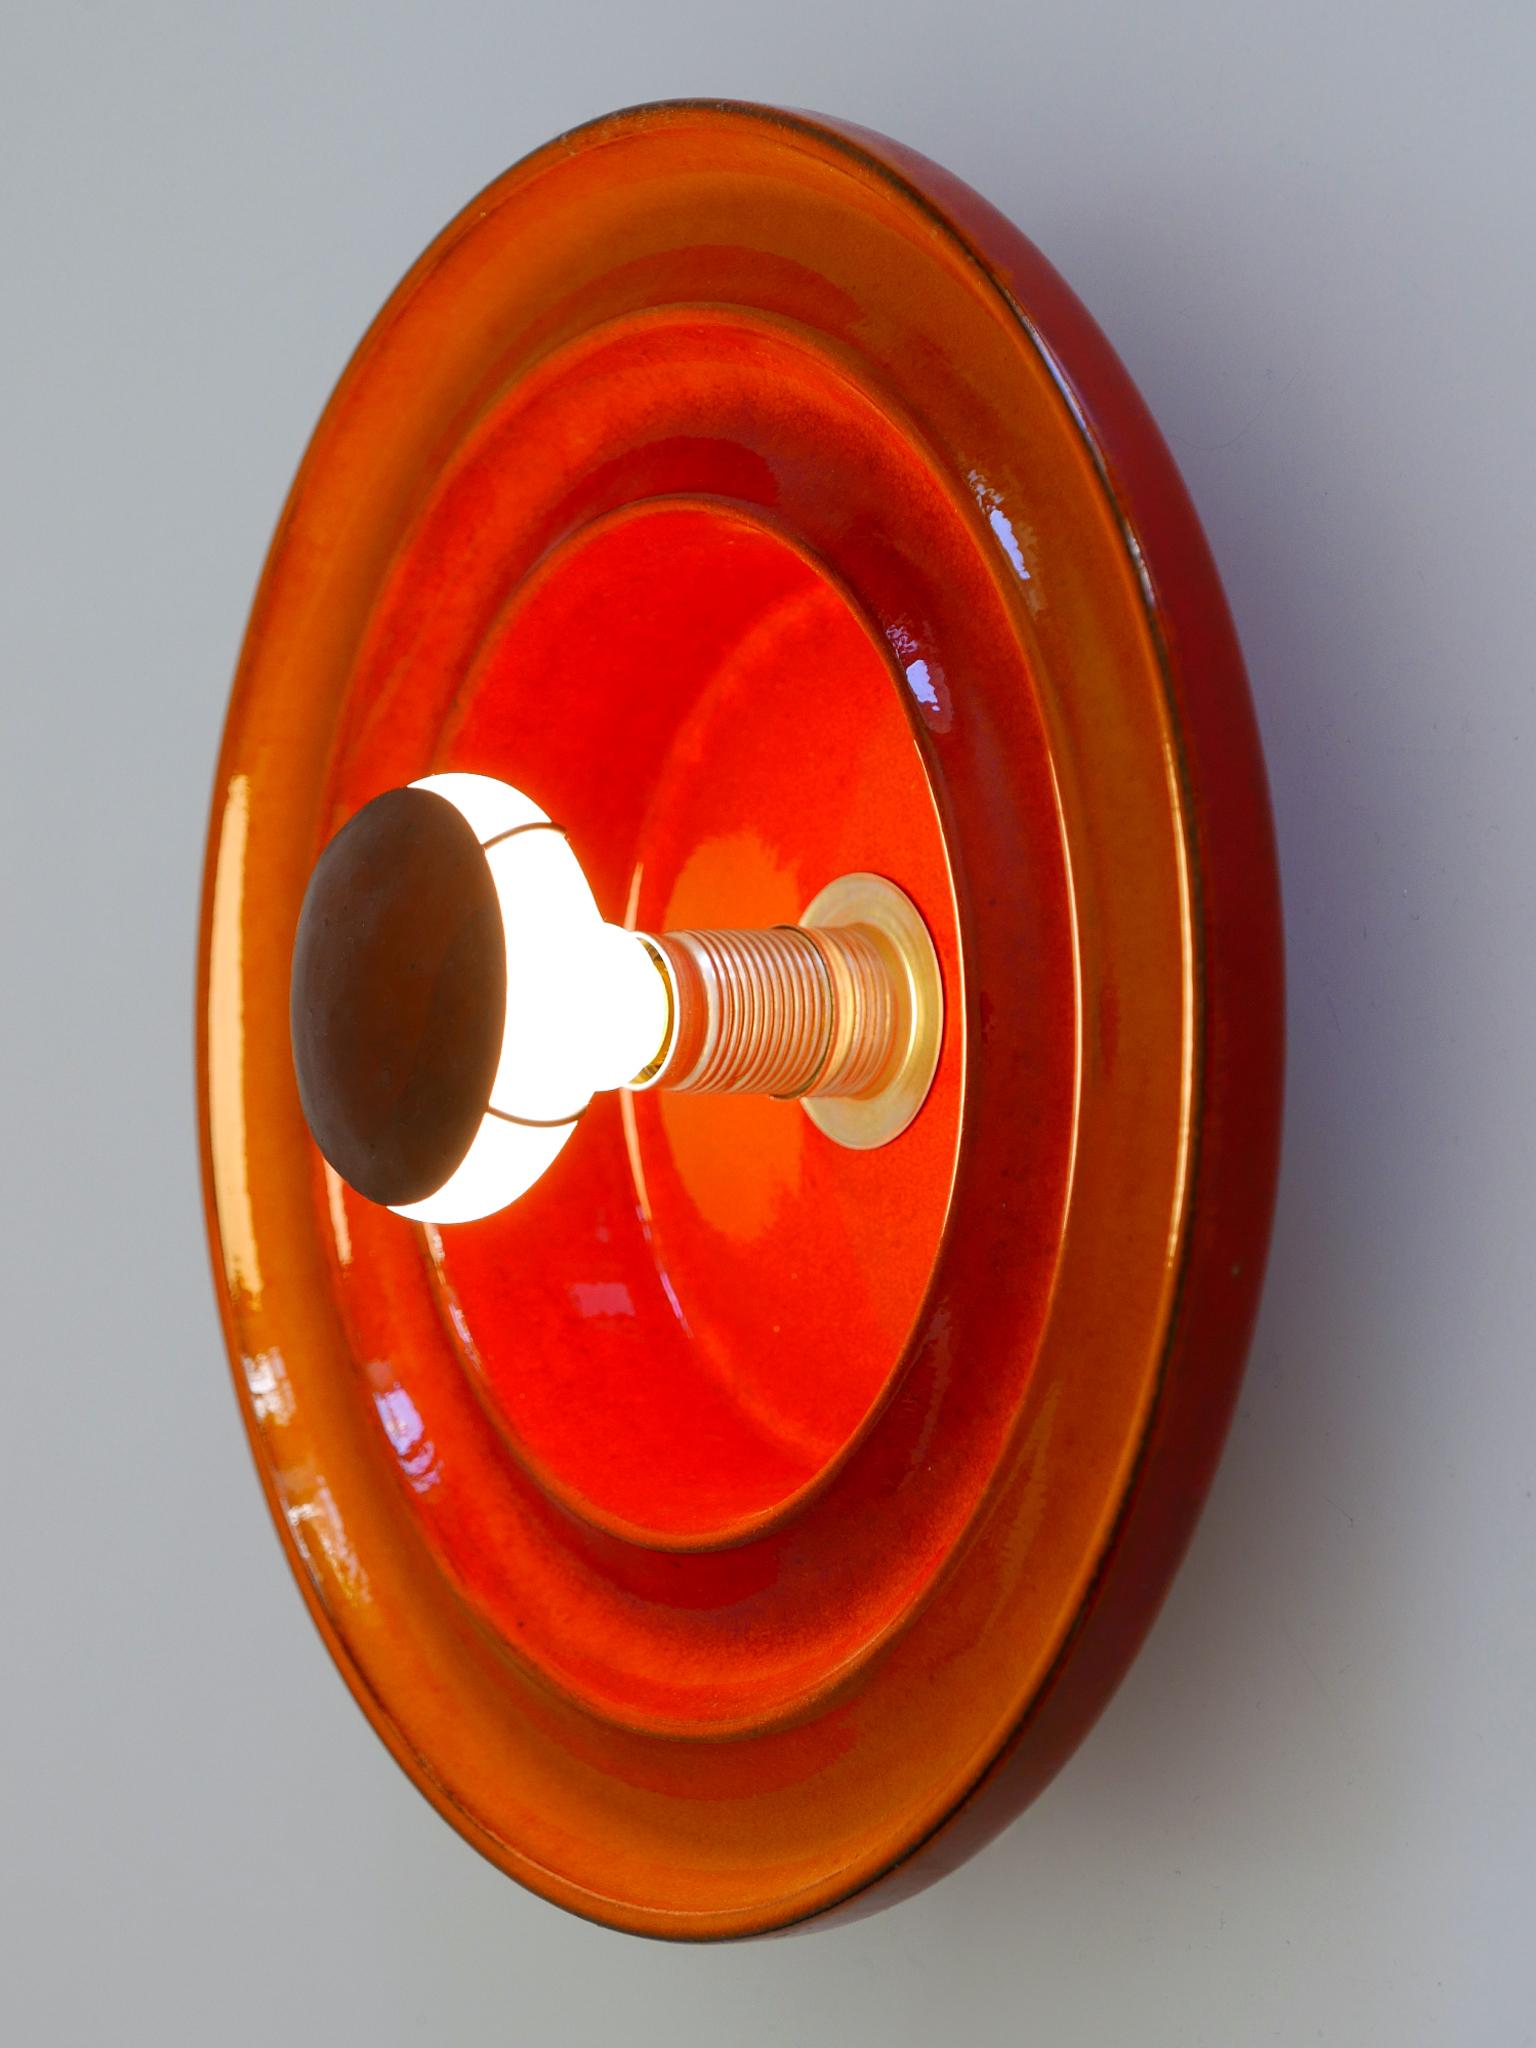 Highly Decorative Mid Century Modern Ceramic Sconce or Wall Light Germany 1960s For Sale 6